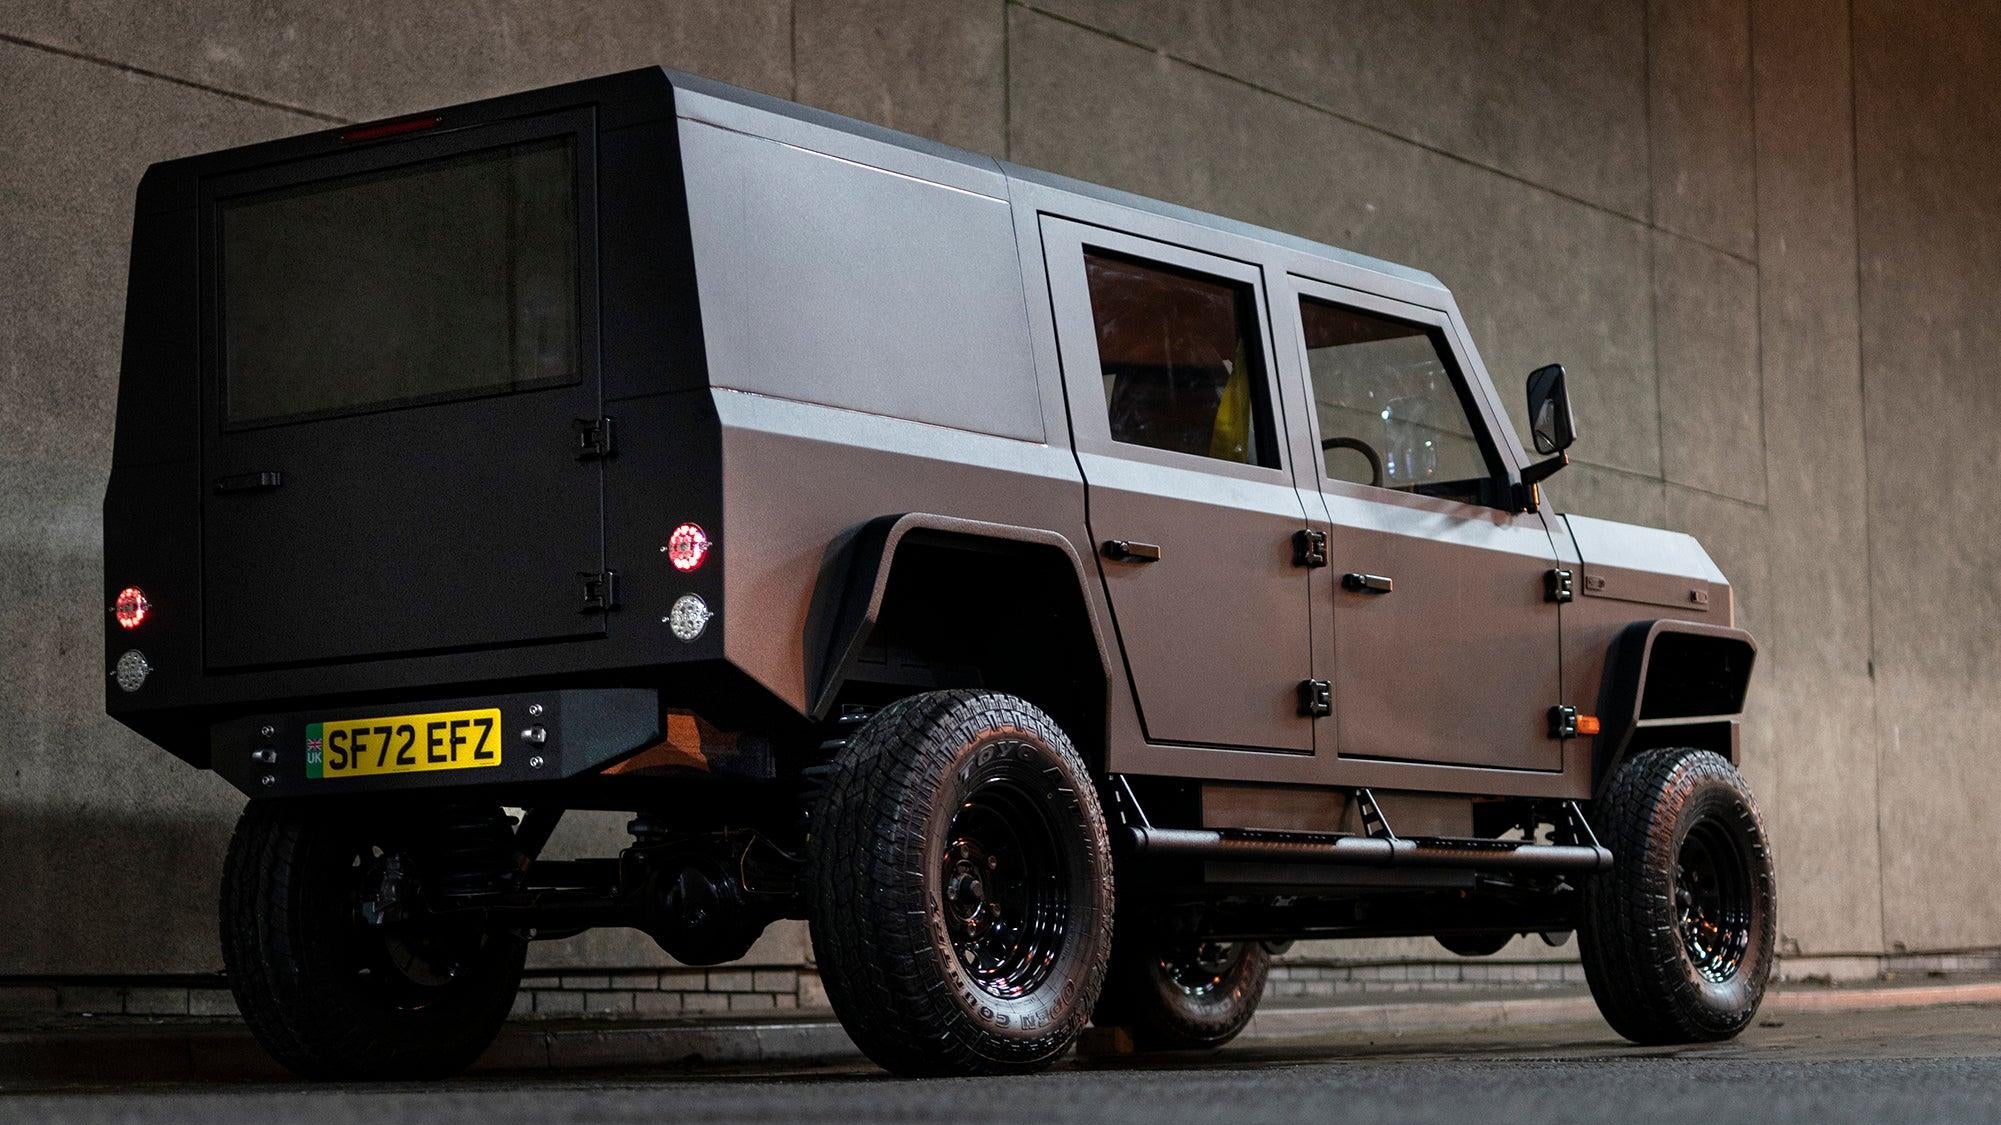 The Munro MK_1 Is an Electric SUV for Hardcore Off-Roading